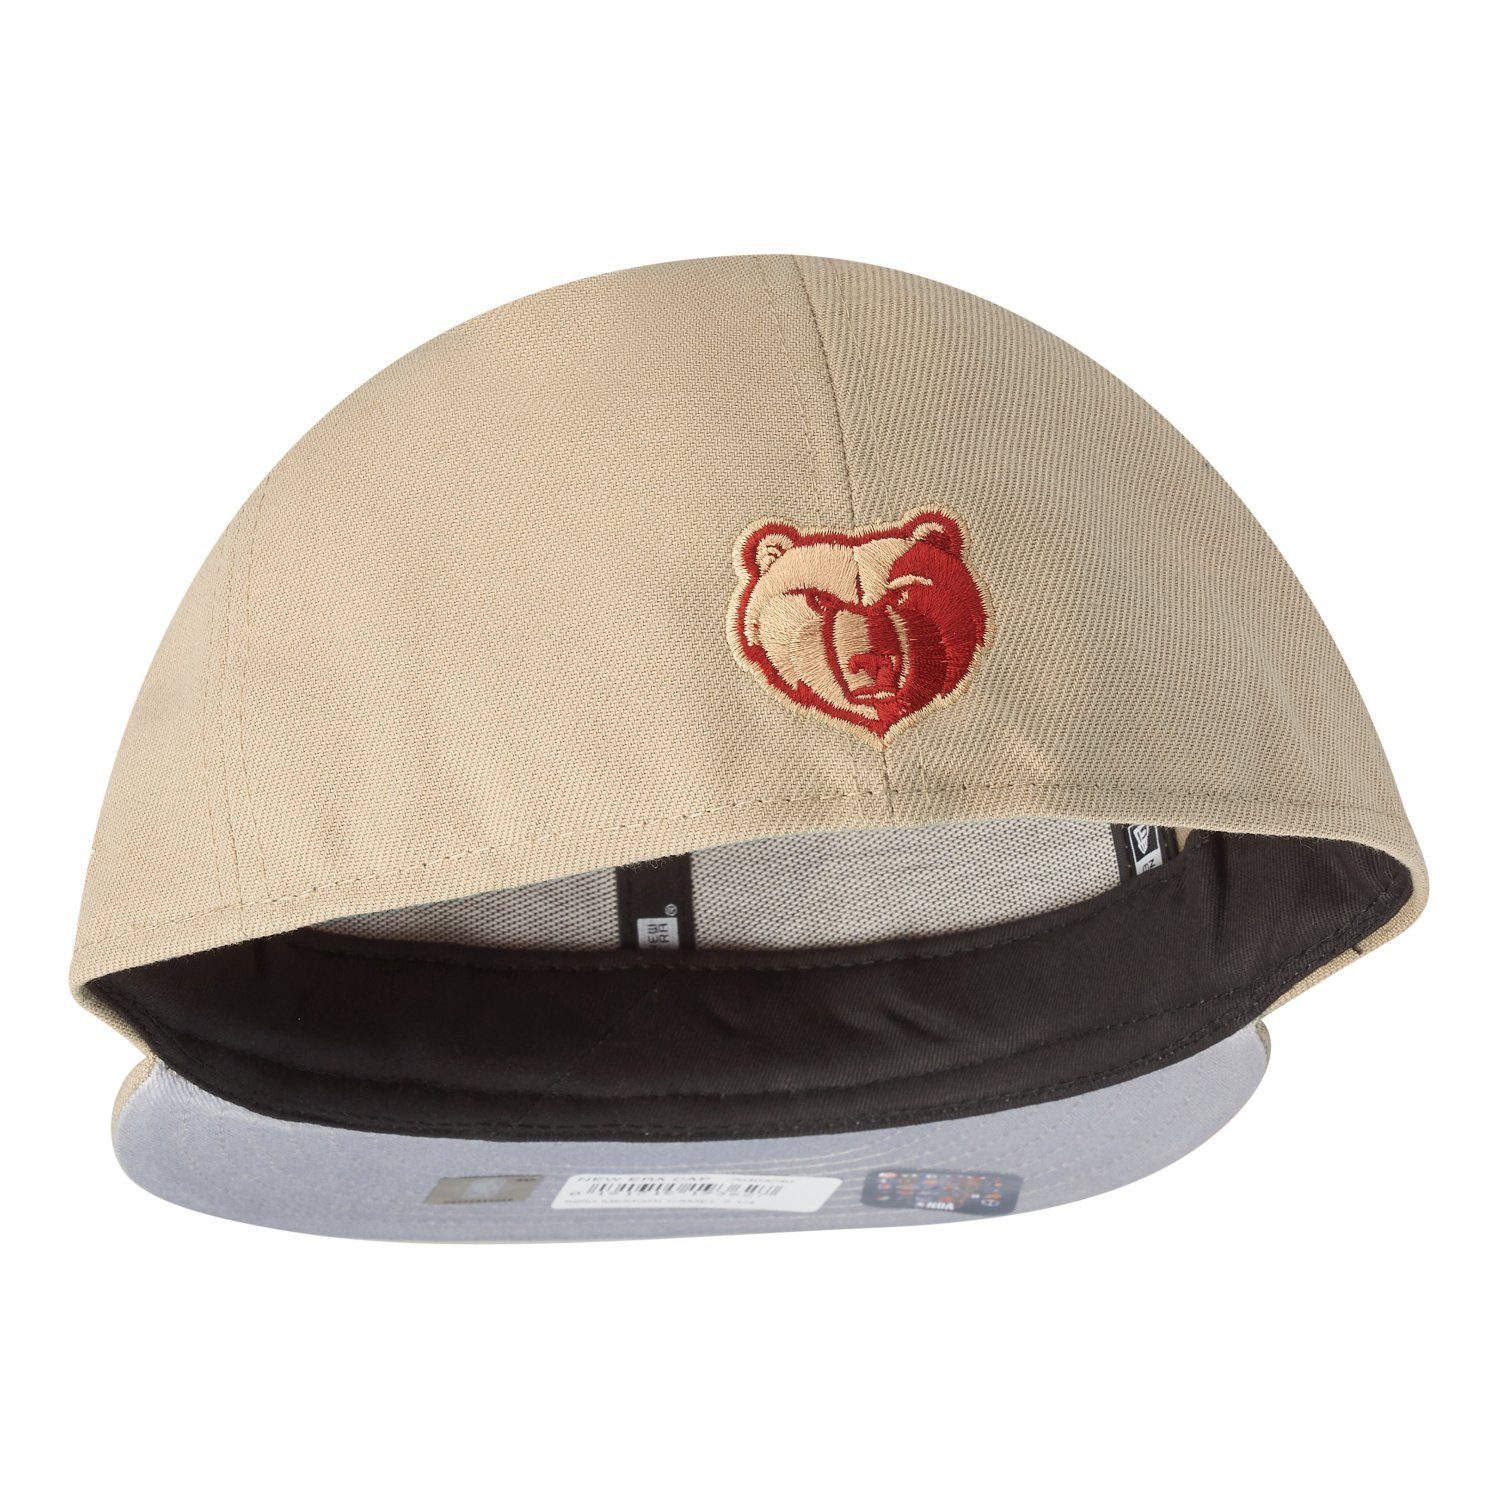 New Cap Grizzlies 59Fifty Era Memphis Fitted